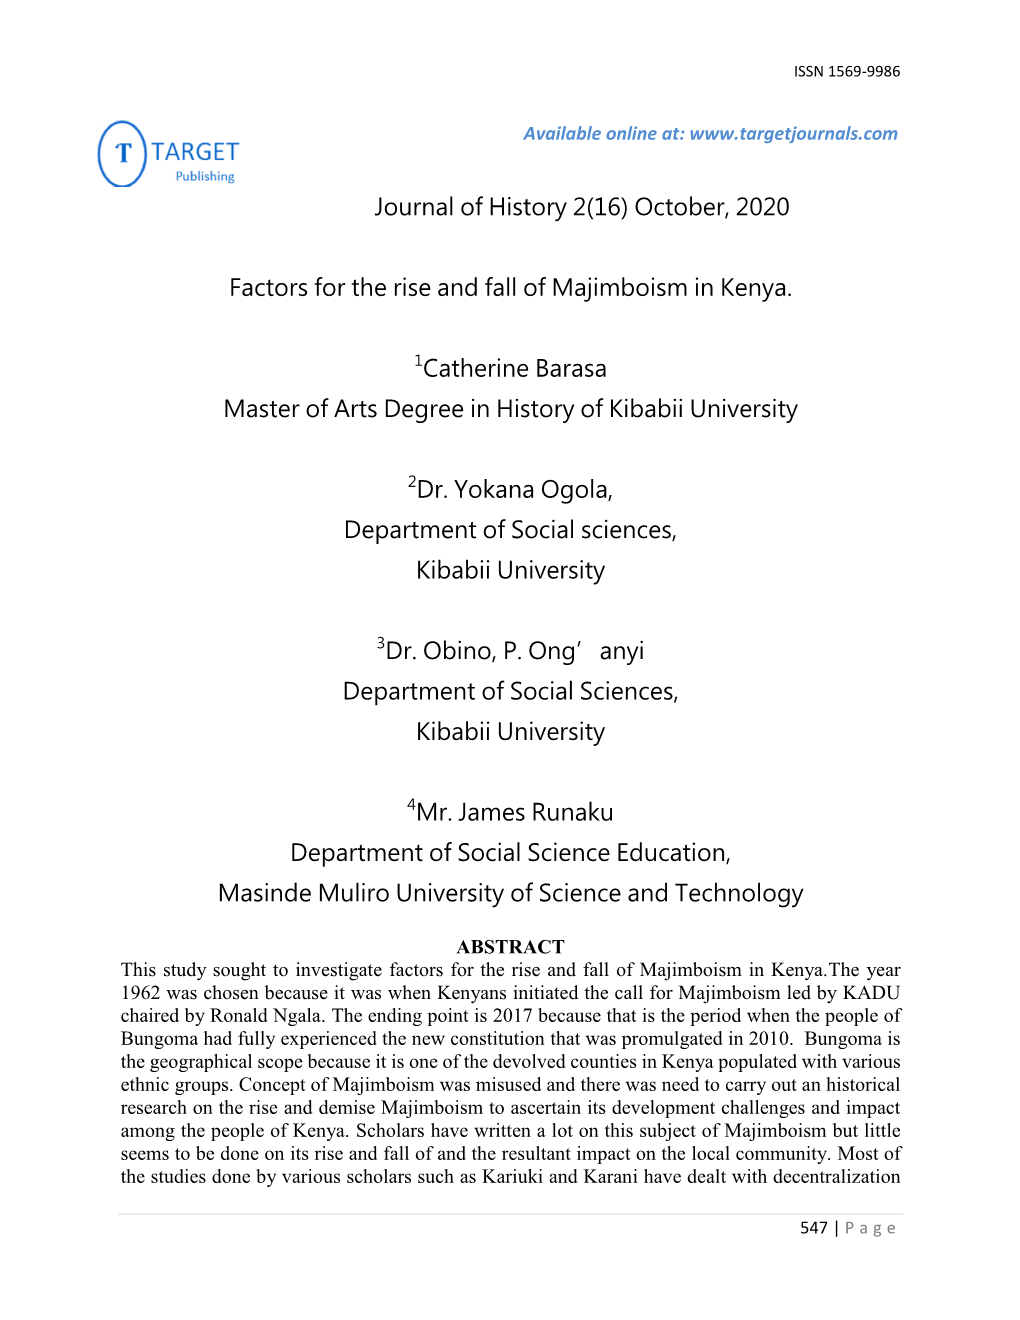 Journal of History 2(16) October, 2020 Factors for the Rise and Fall Of